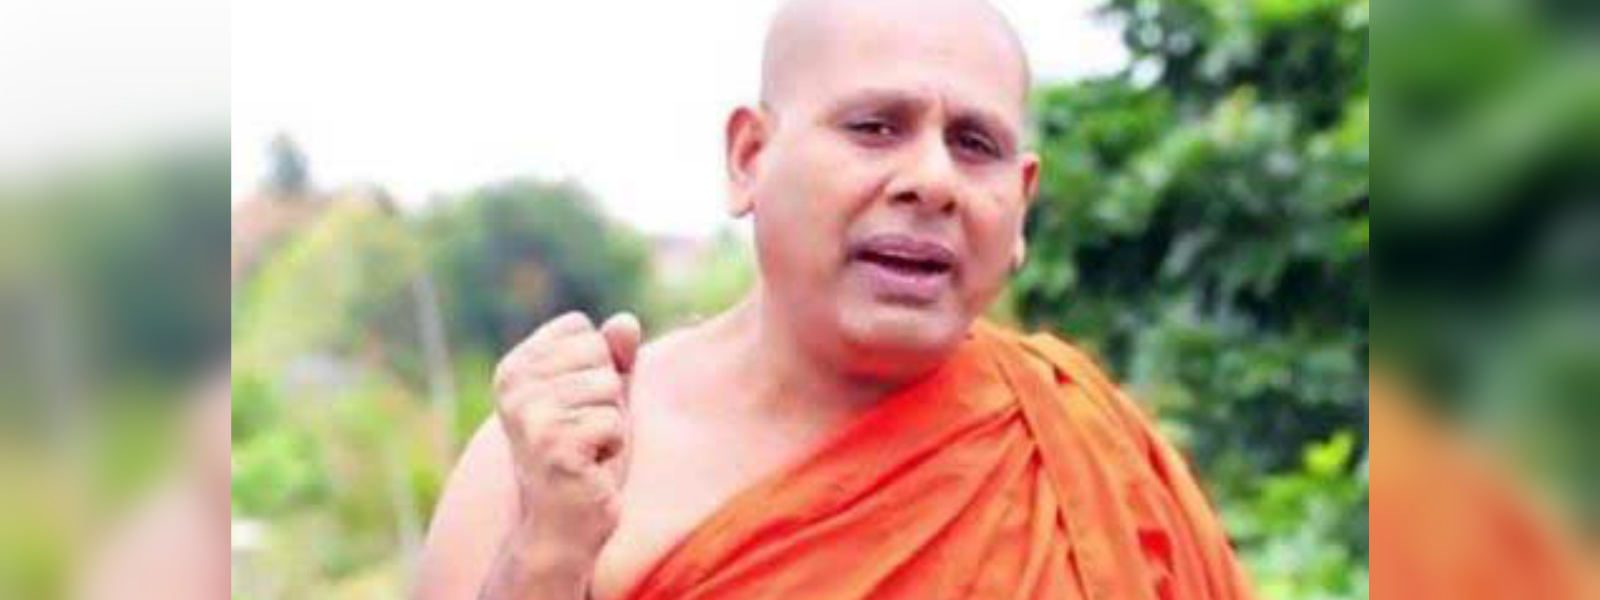 News 1st exclusive with Ven. Seelarathana Thero